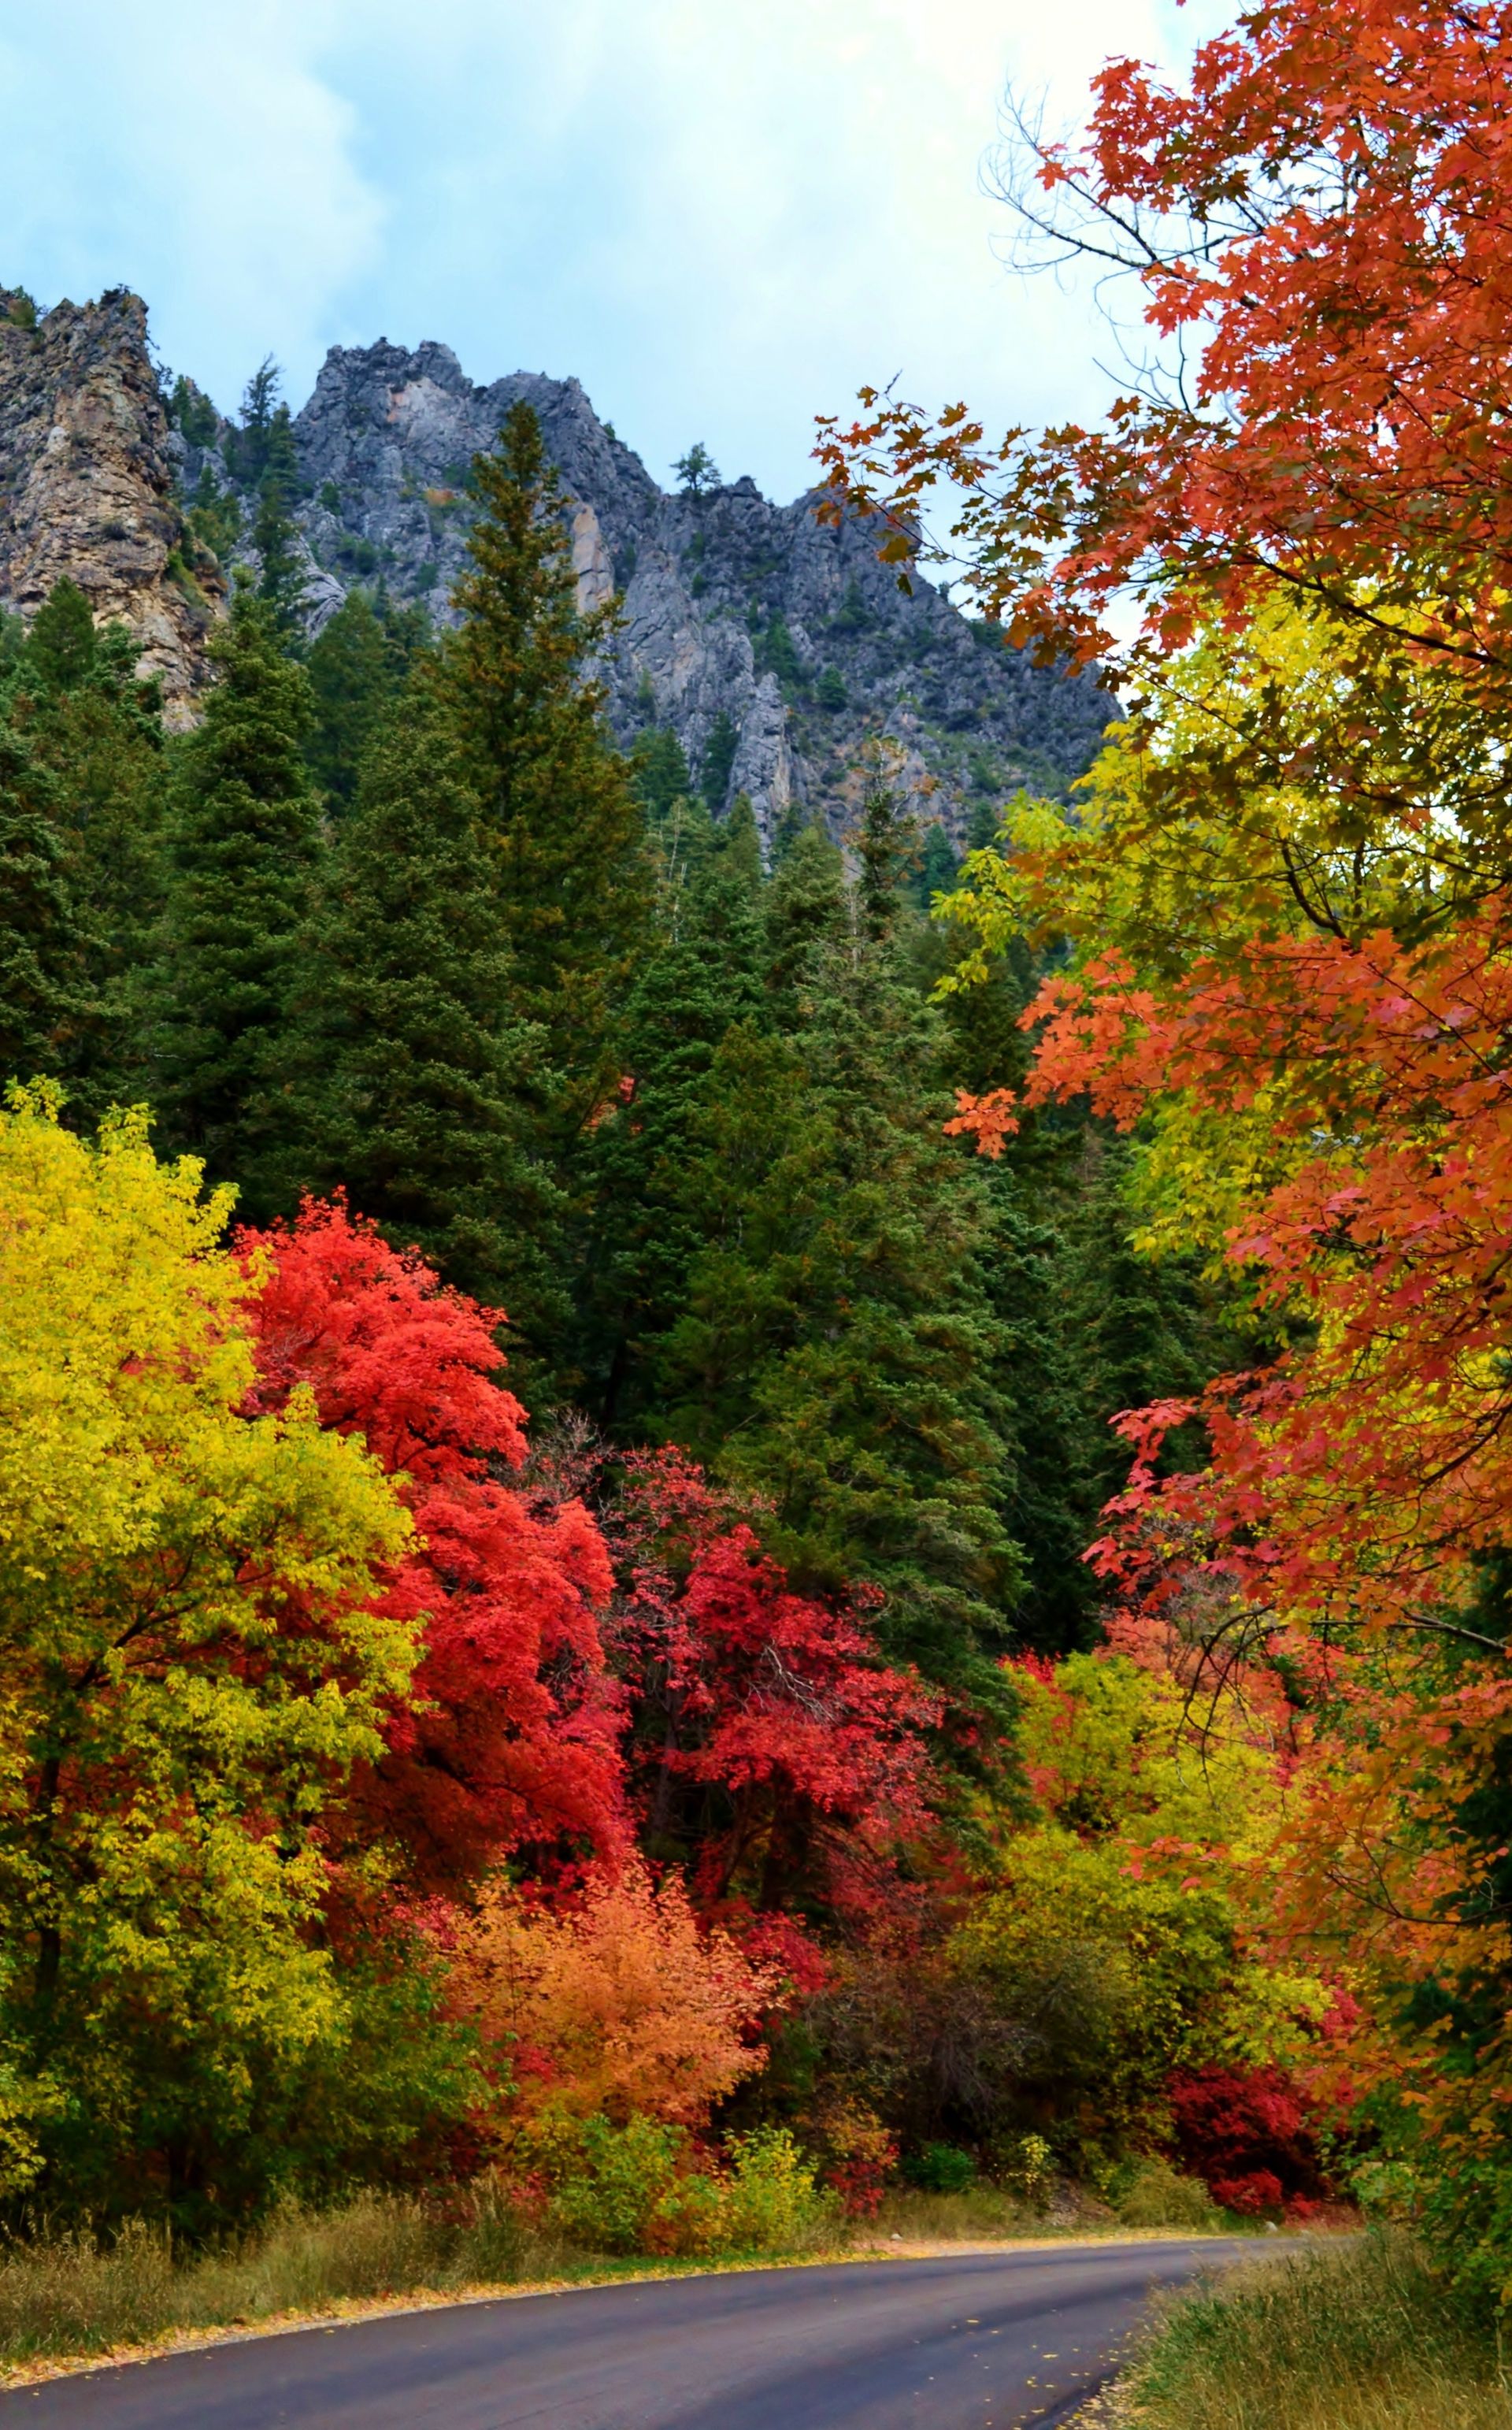 Trees with leaves changing to yellow, red, and orange along a road in the mountains during the autumn.